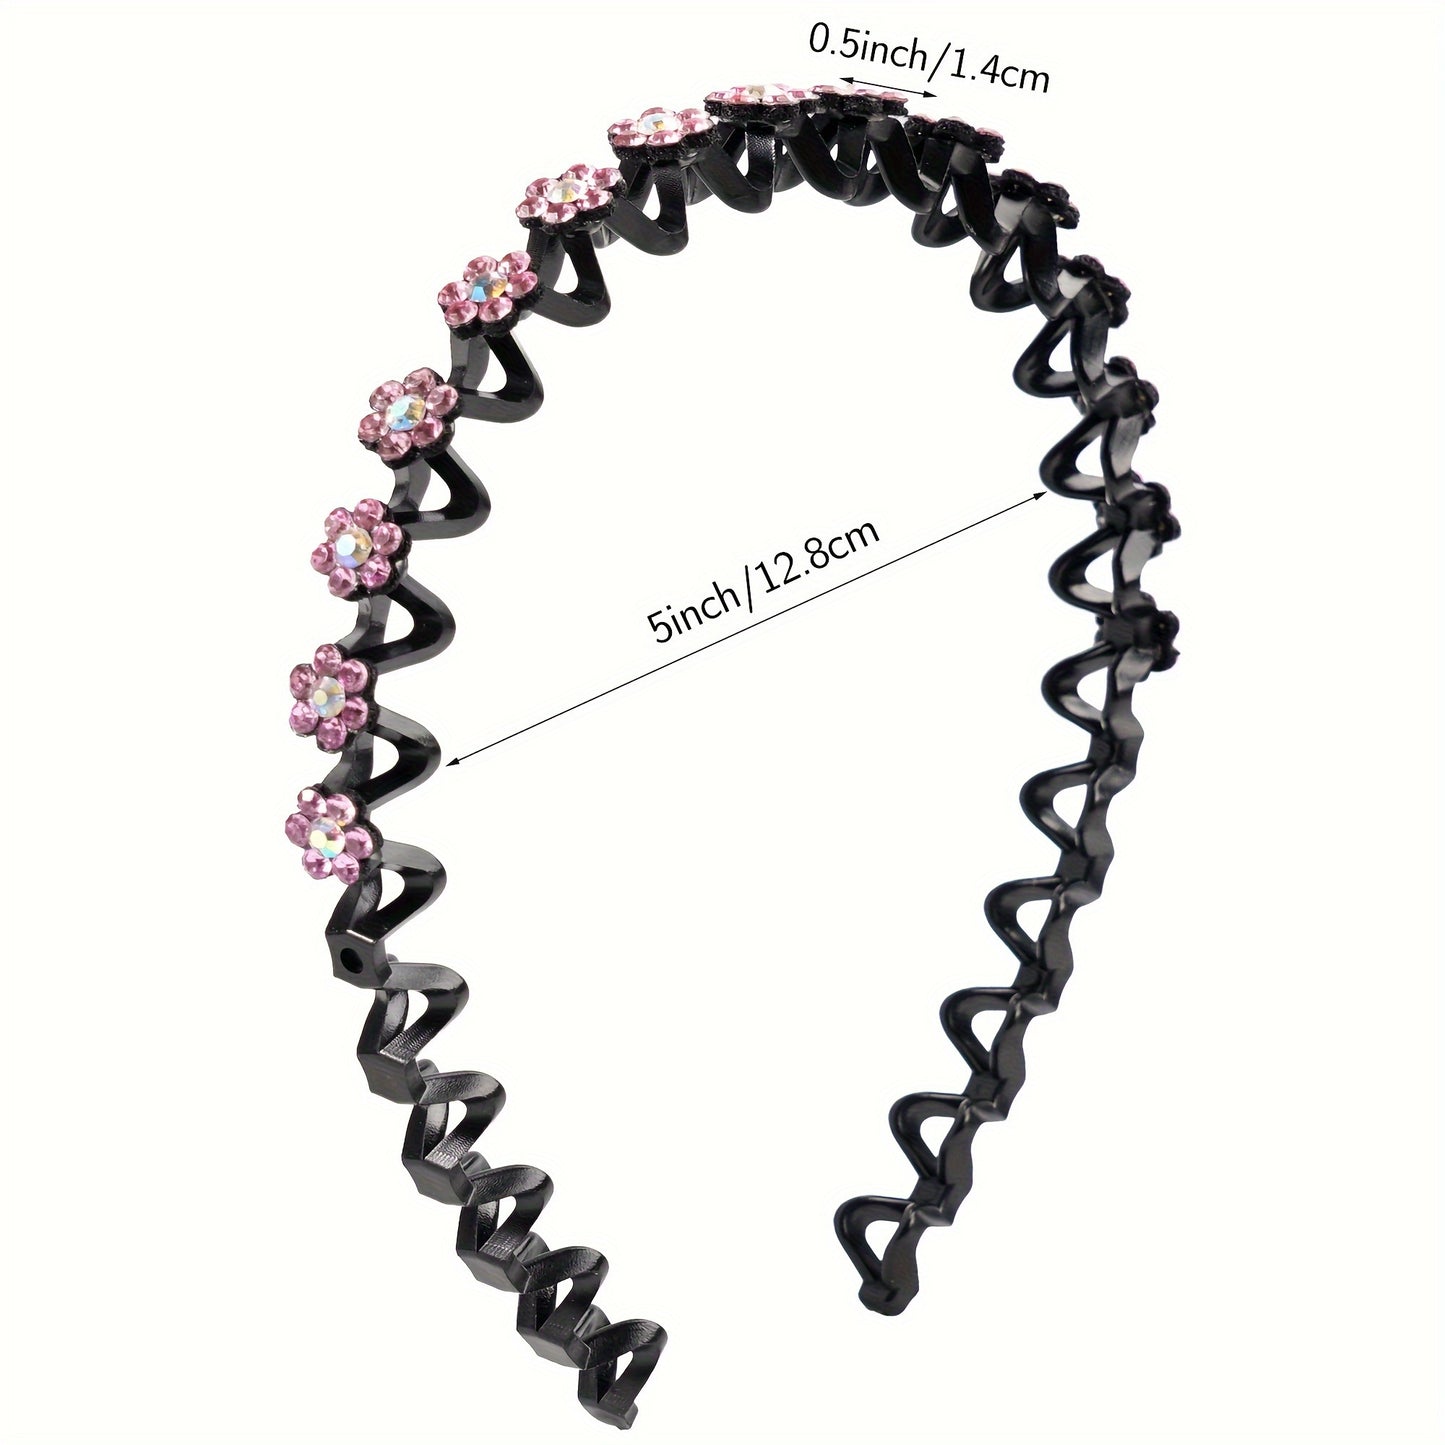 4pcs Dazzling Glamorous Sparkling Rhinestone Flower Head Bands - Comfort-Fit, Non-Slip Hair Hoops for Fashion-Forward Women and Girls